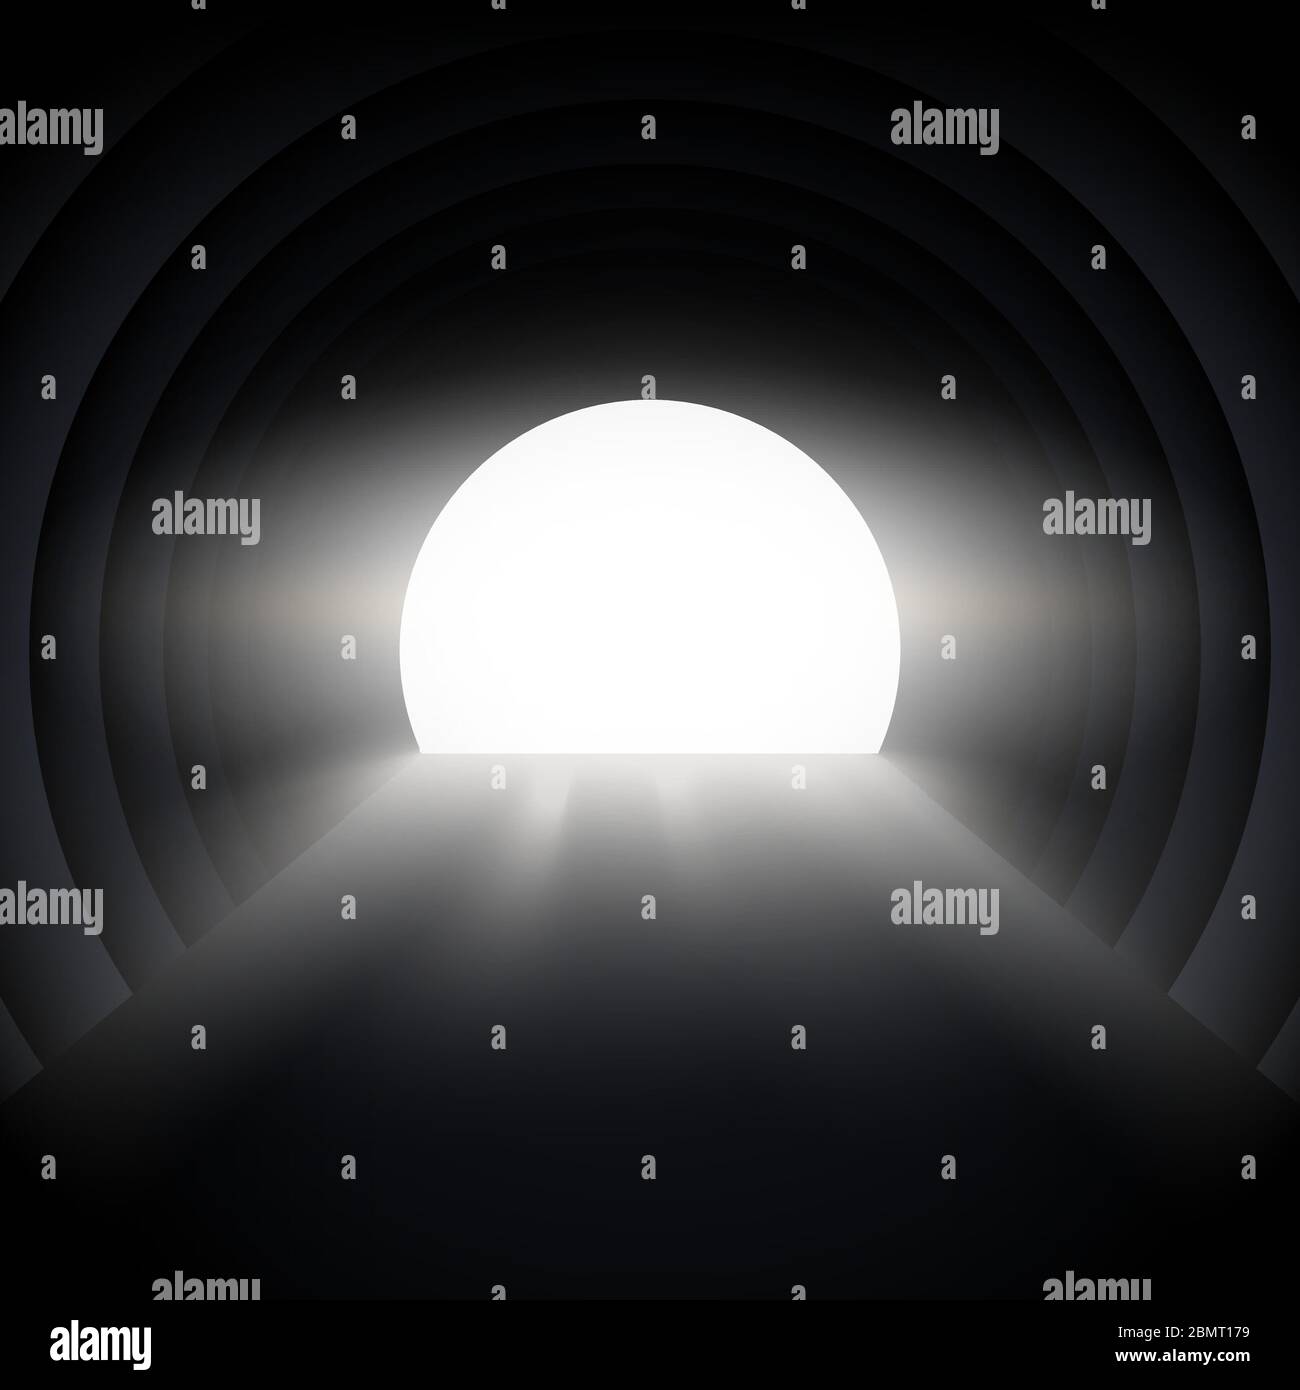 light at the end of the tunnel Stock Vector